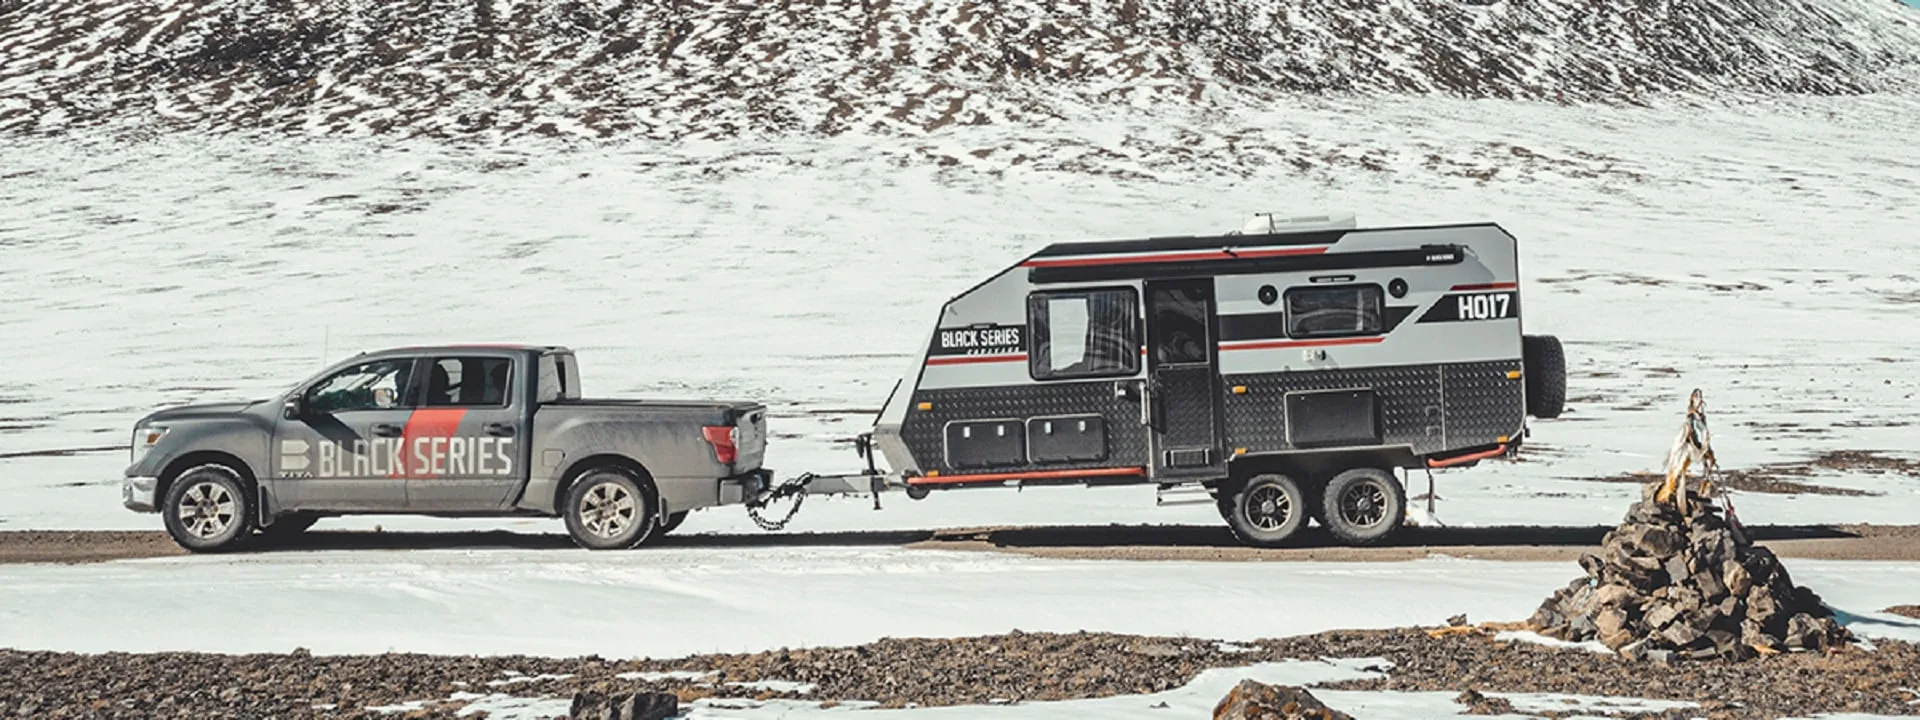 An HQ17 travel trailer during testing in the backcountry in winter